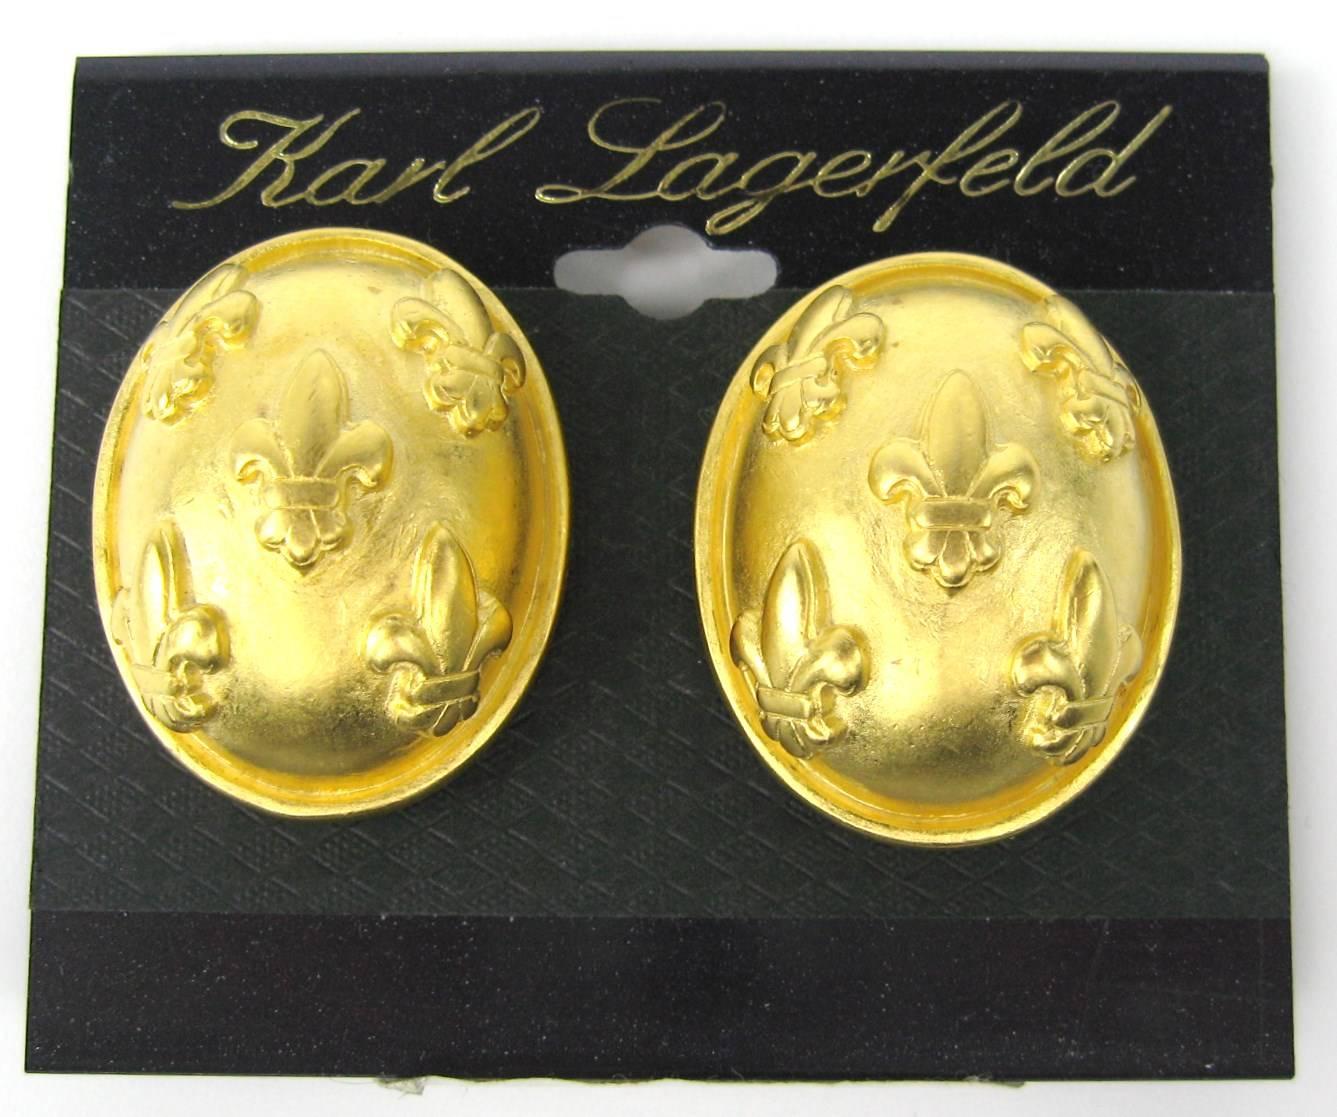 Karl Lagerfeld Earrings Black Gold Gilt Fleur de Lis  New, Never Worn In New Condition For Sale In Wallkill, NY